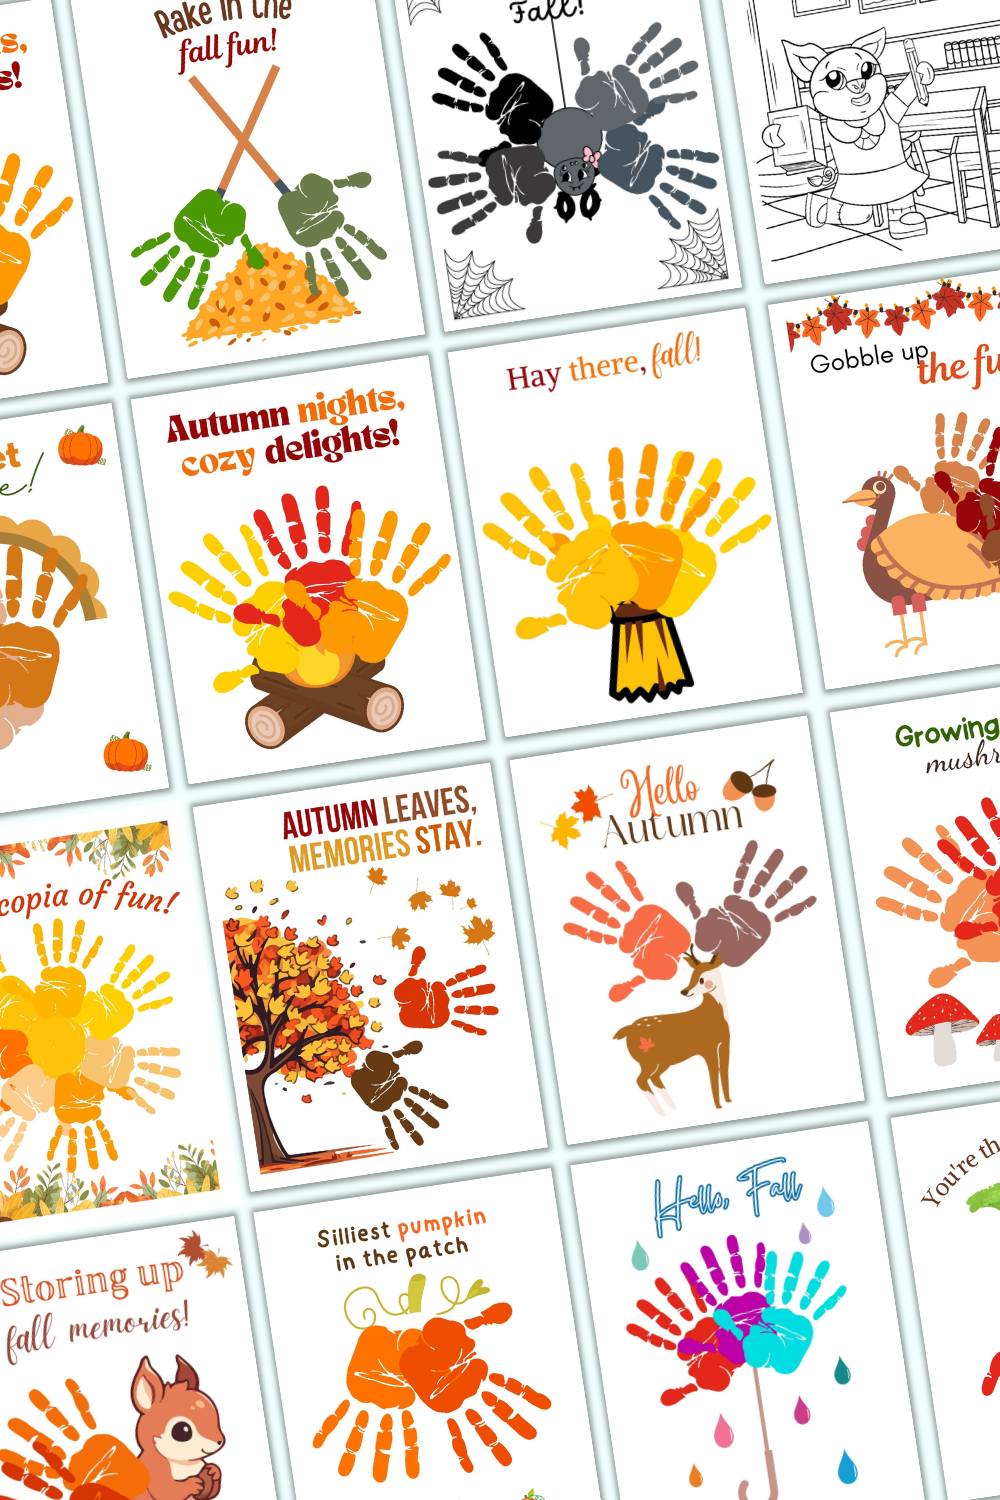 A preview of 16 handprint craft printables for kids with a fall theme